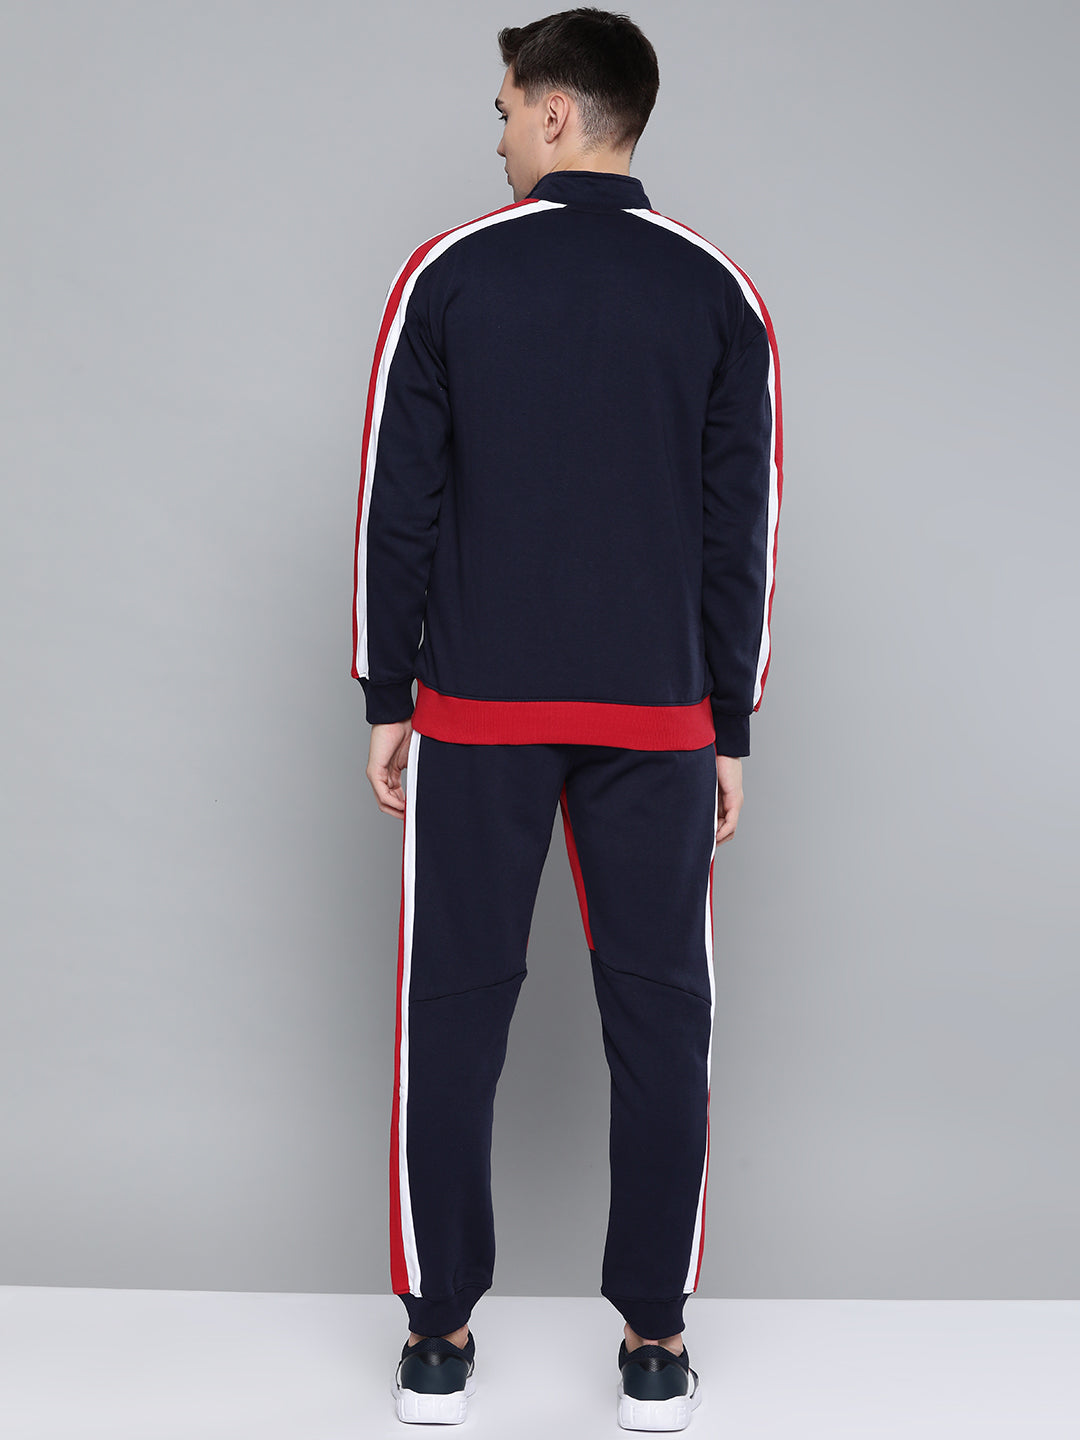 Alcis Men Navy Blue  Red Striped Track Suit